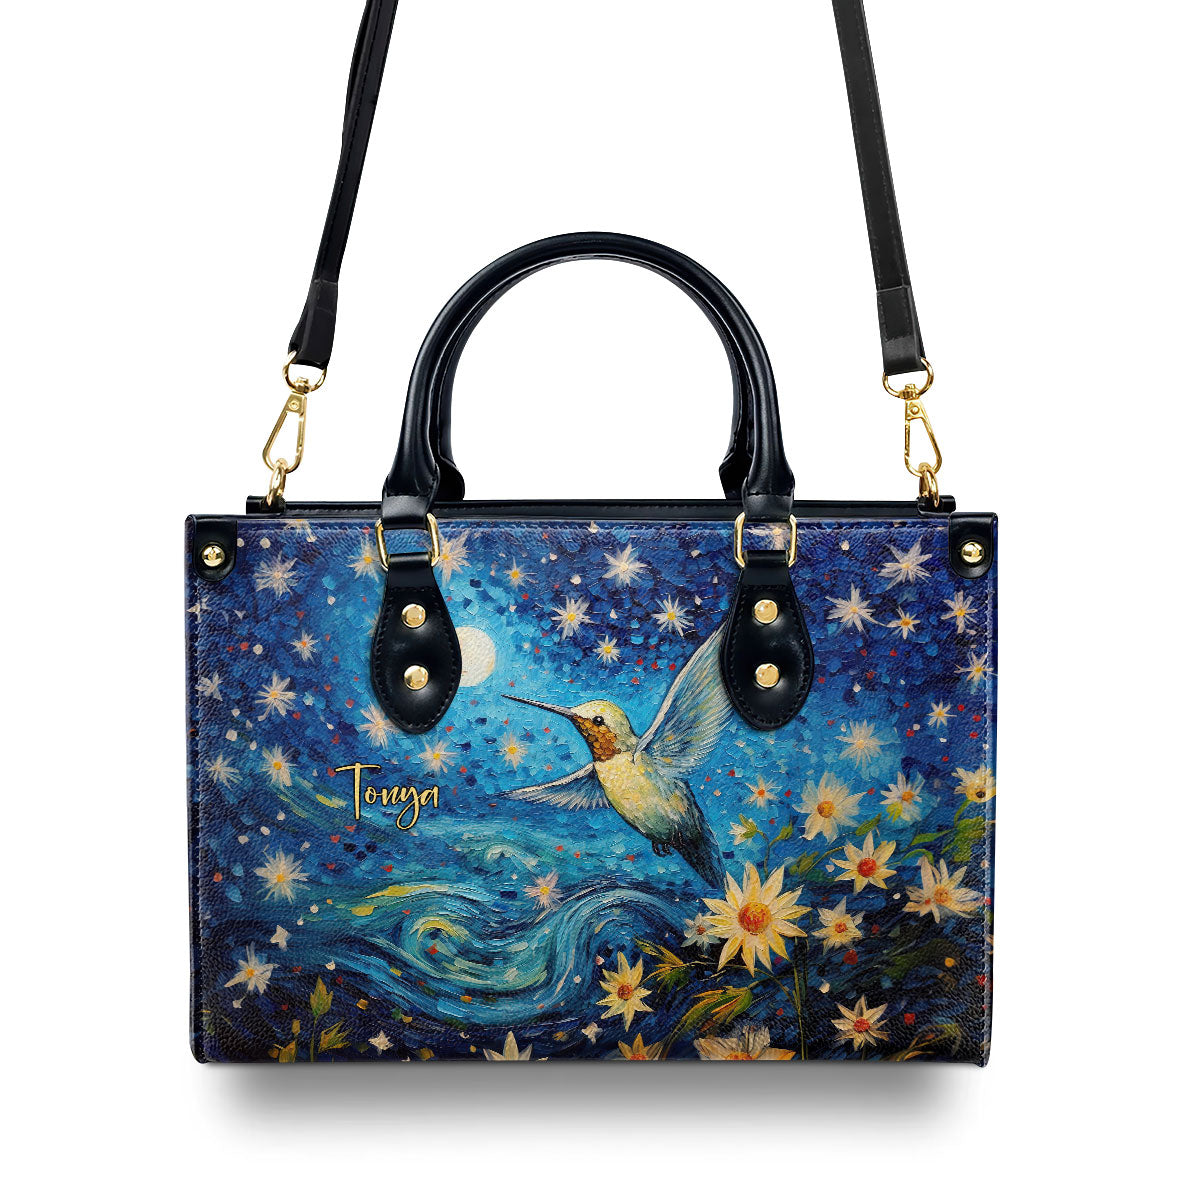 Hummingbird In The Starry Night Style - Personalized Leather Handbag MSM15